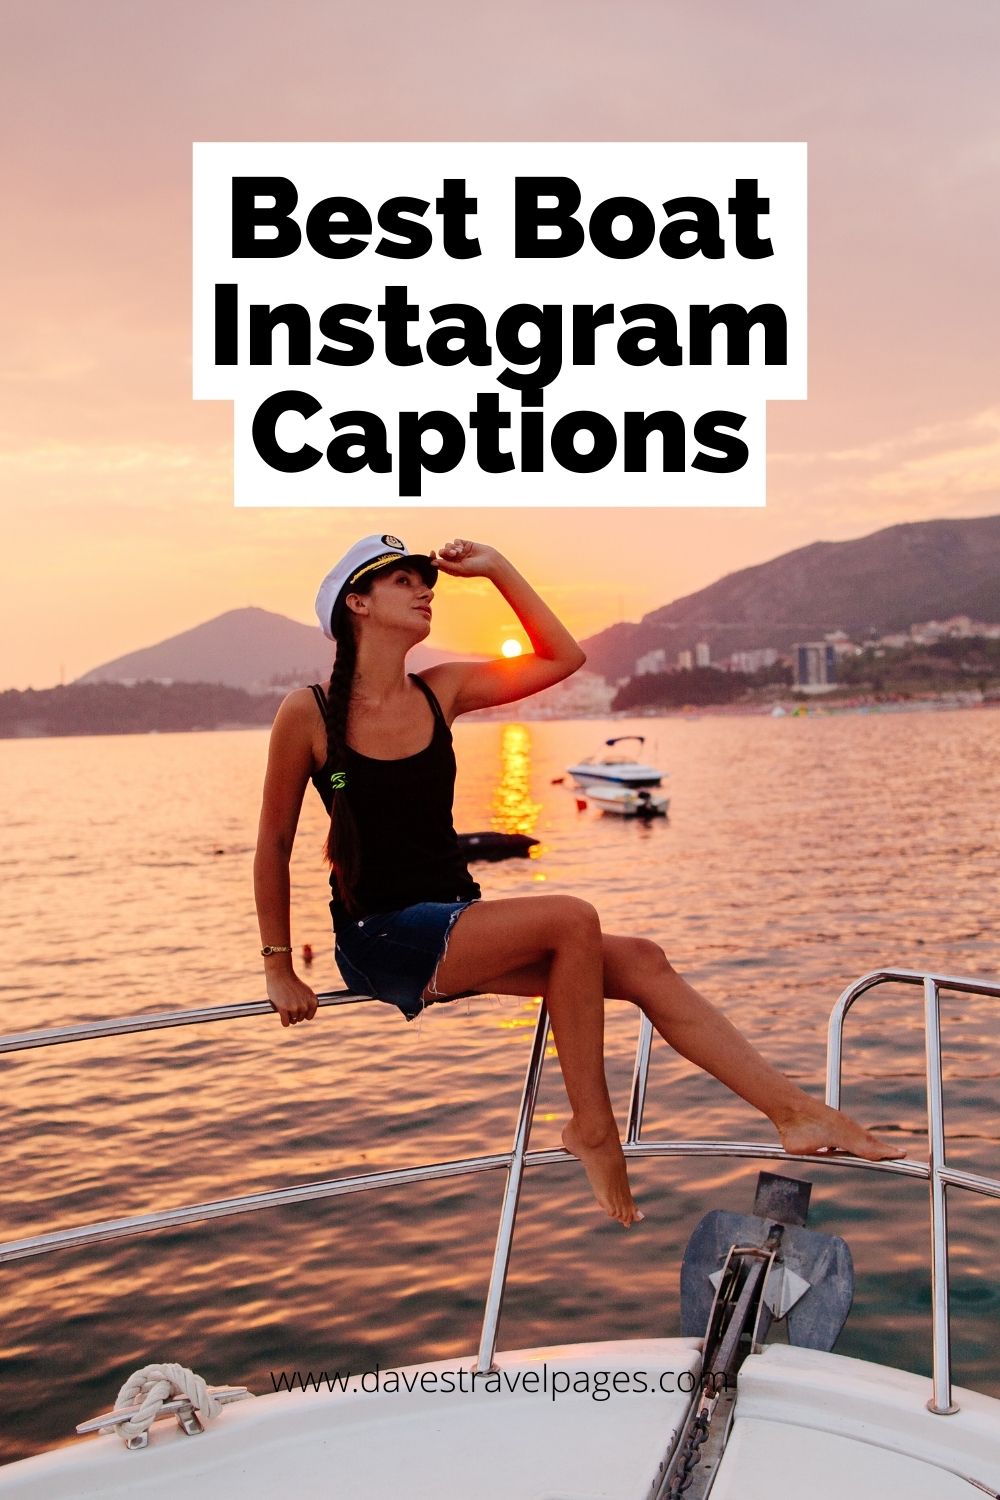 Boat Quotes And Instagram Captions